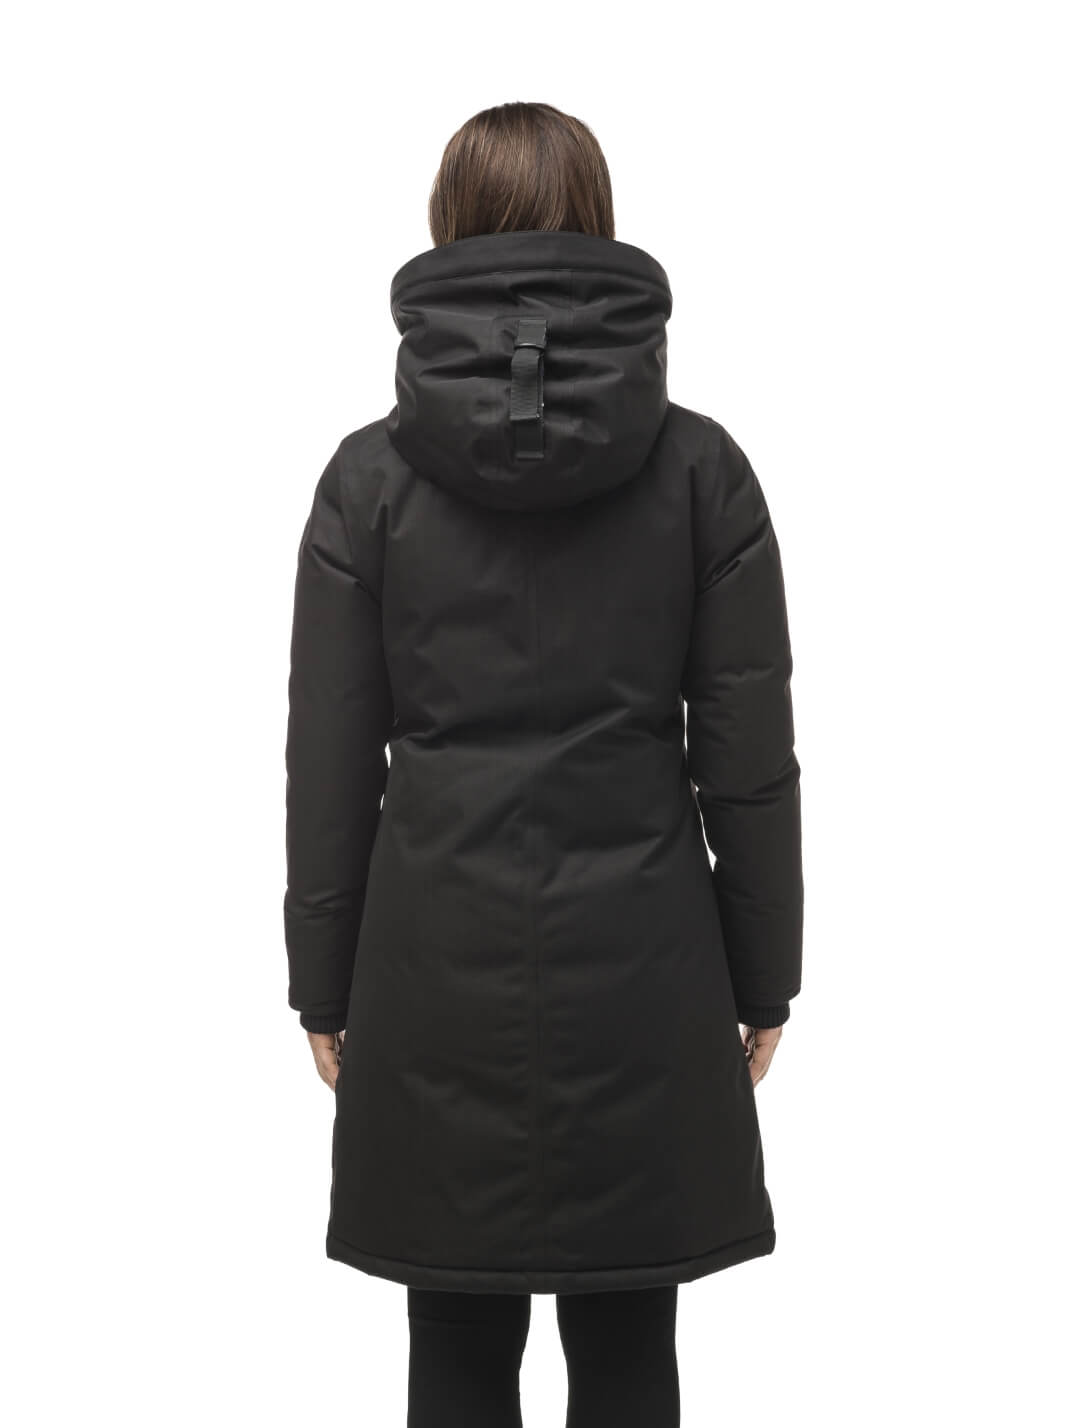 Rebecca Women's Parka in knee length, Canadian duck down insulation, two-way zipper with magnetic front placket, non-removable hood with removable coyote fur trim, in Black